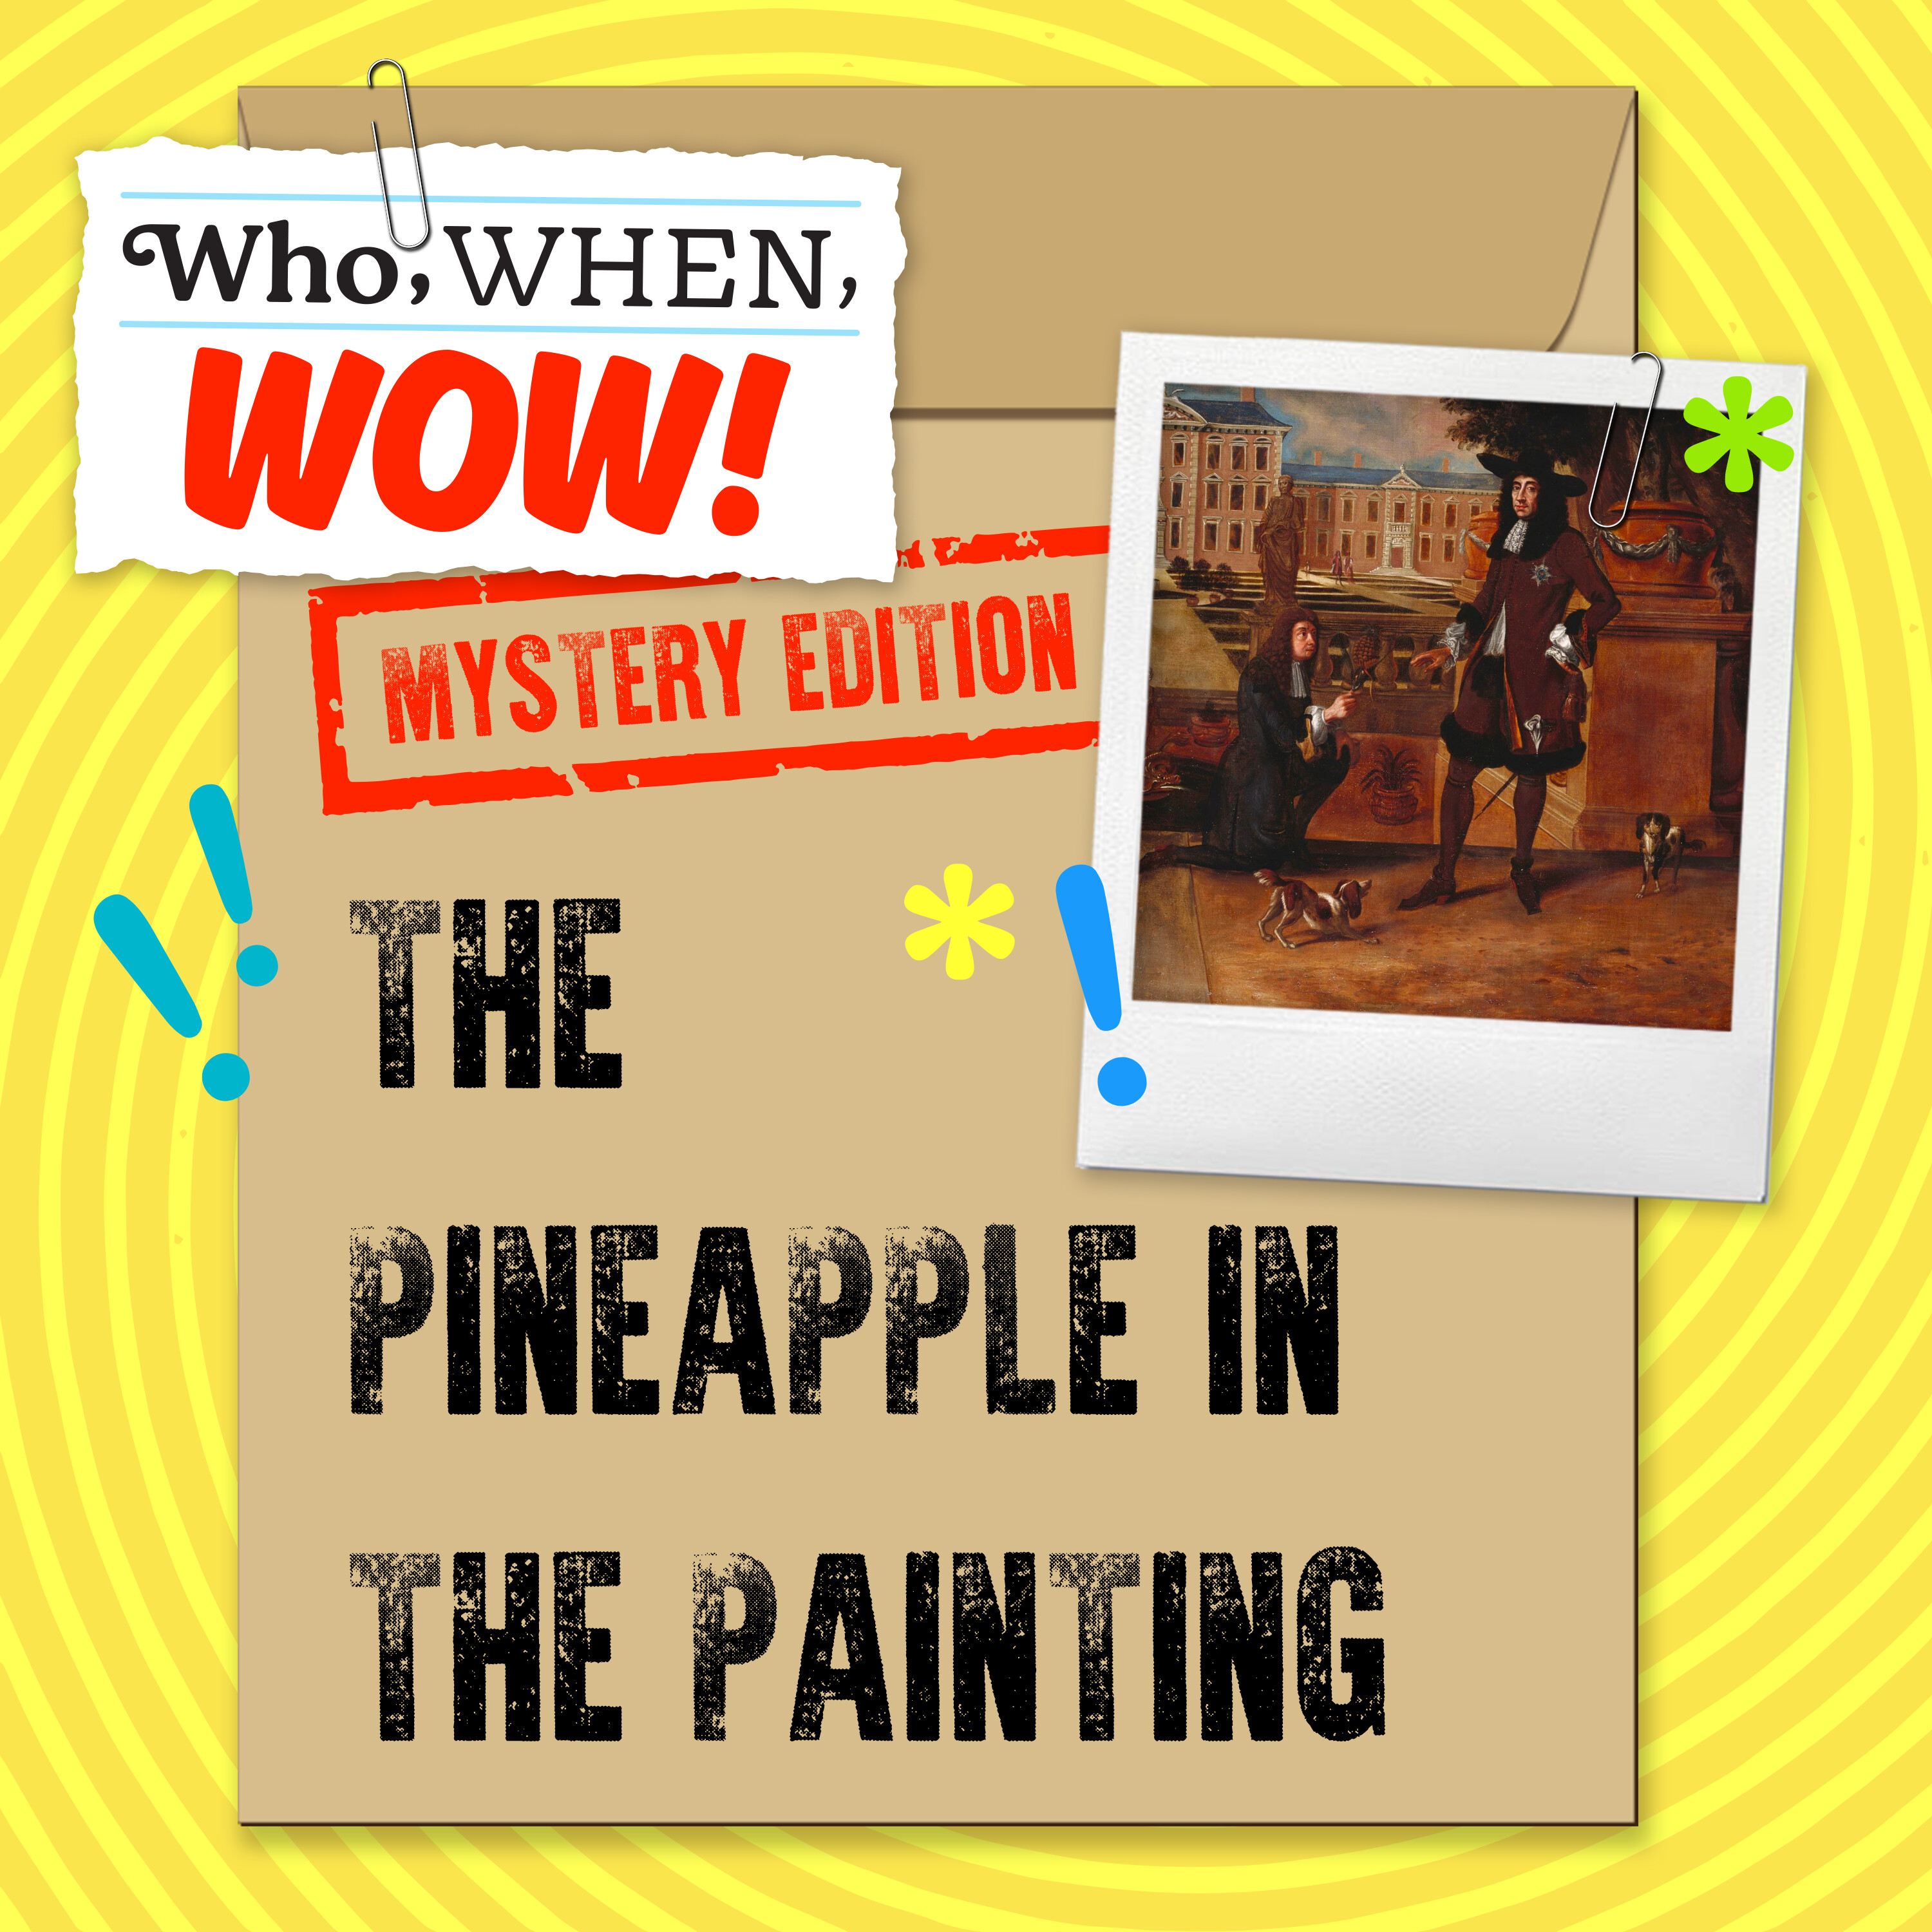 The Pineapple in the Painting (3/20/24)